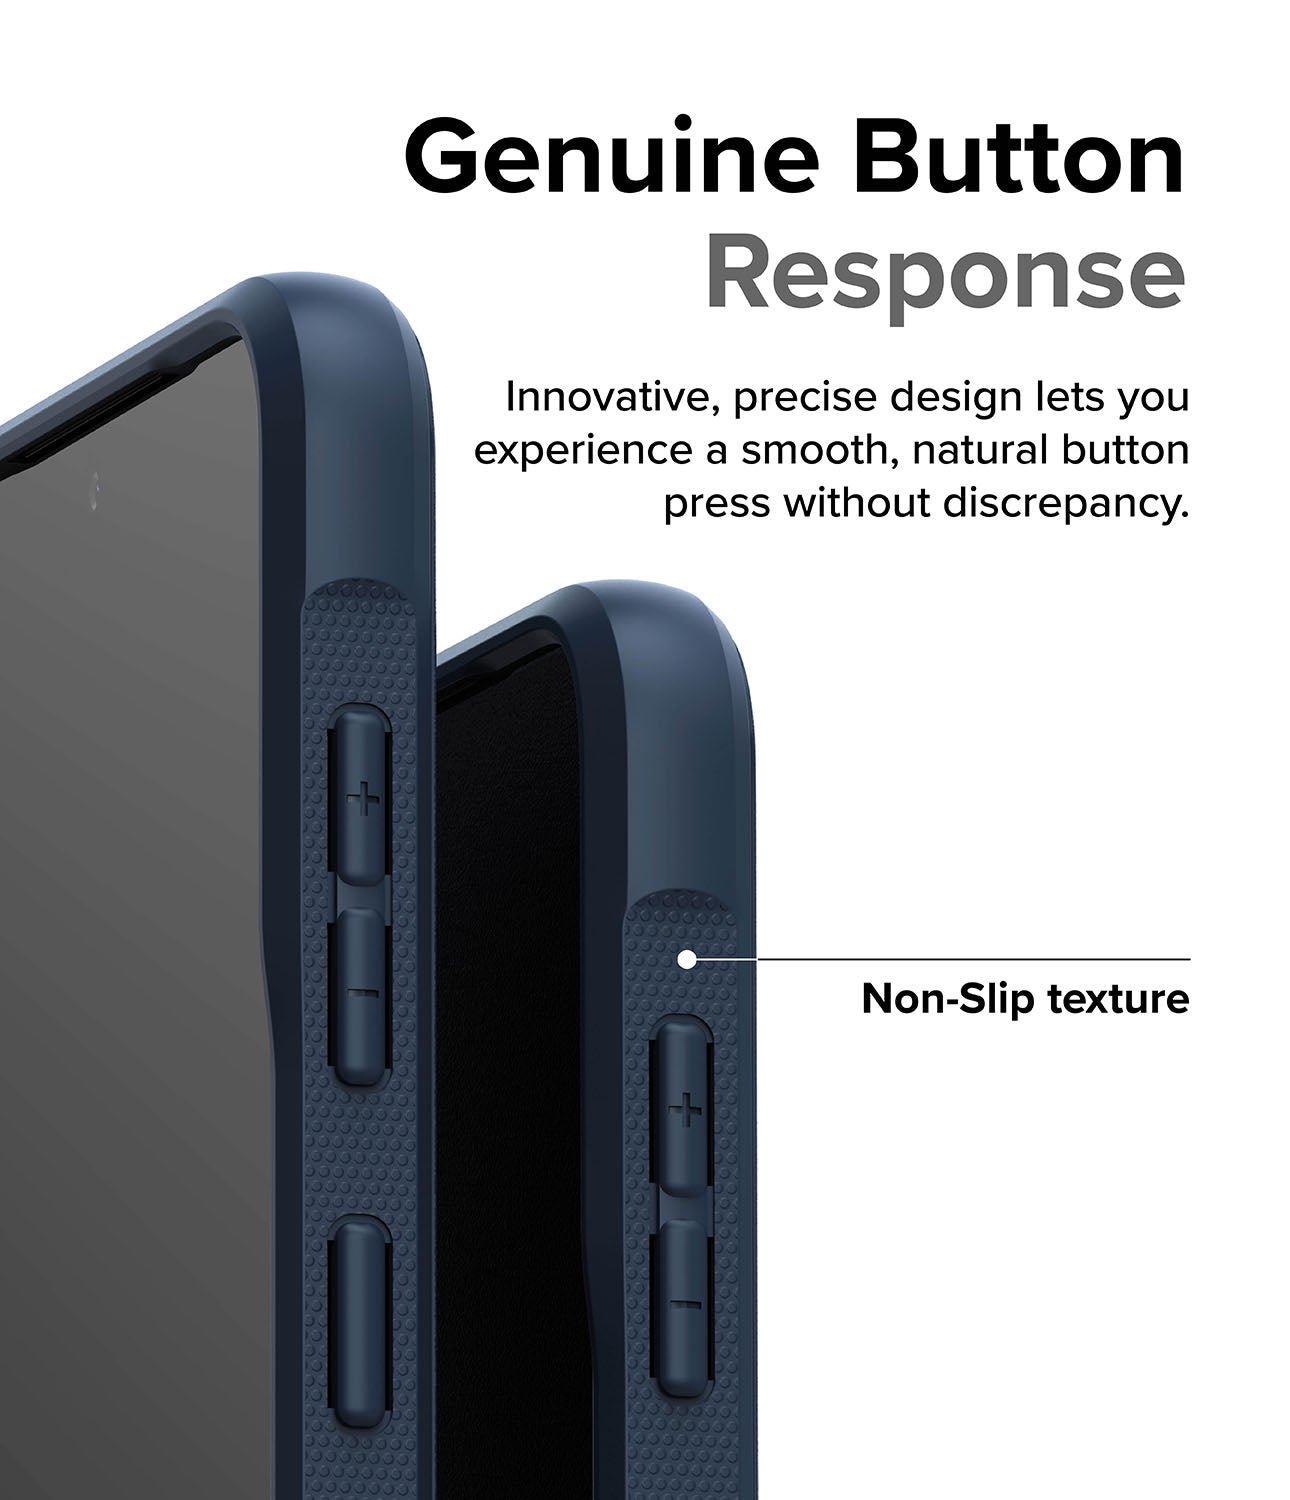 Galaxy S23 Plus Case | Onyx Navy - Genuine Button Response. Innovative, precise design lets you experience a smooth, natural button press without discrepancy. Non-Slip texture.